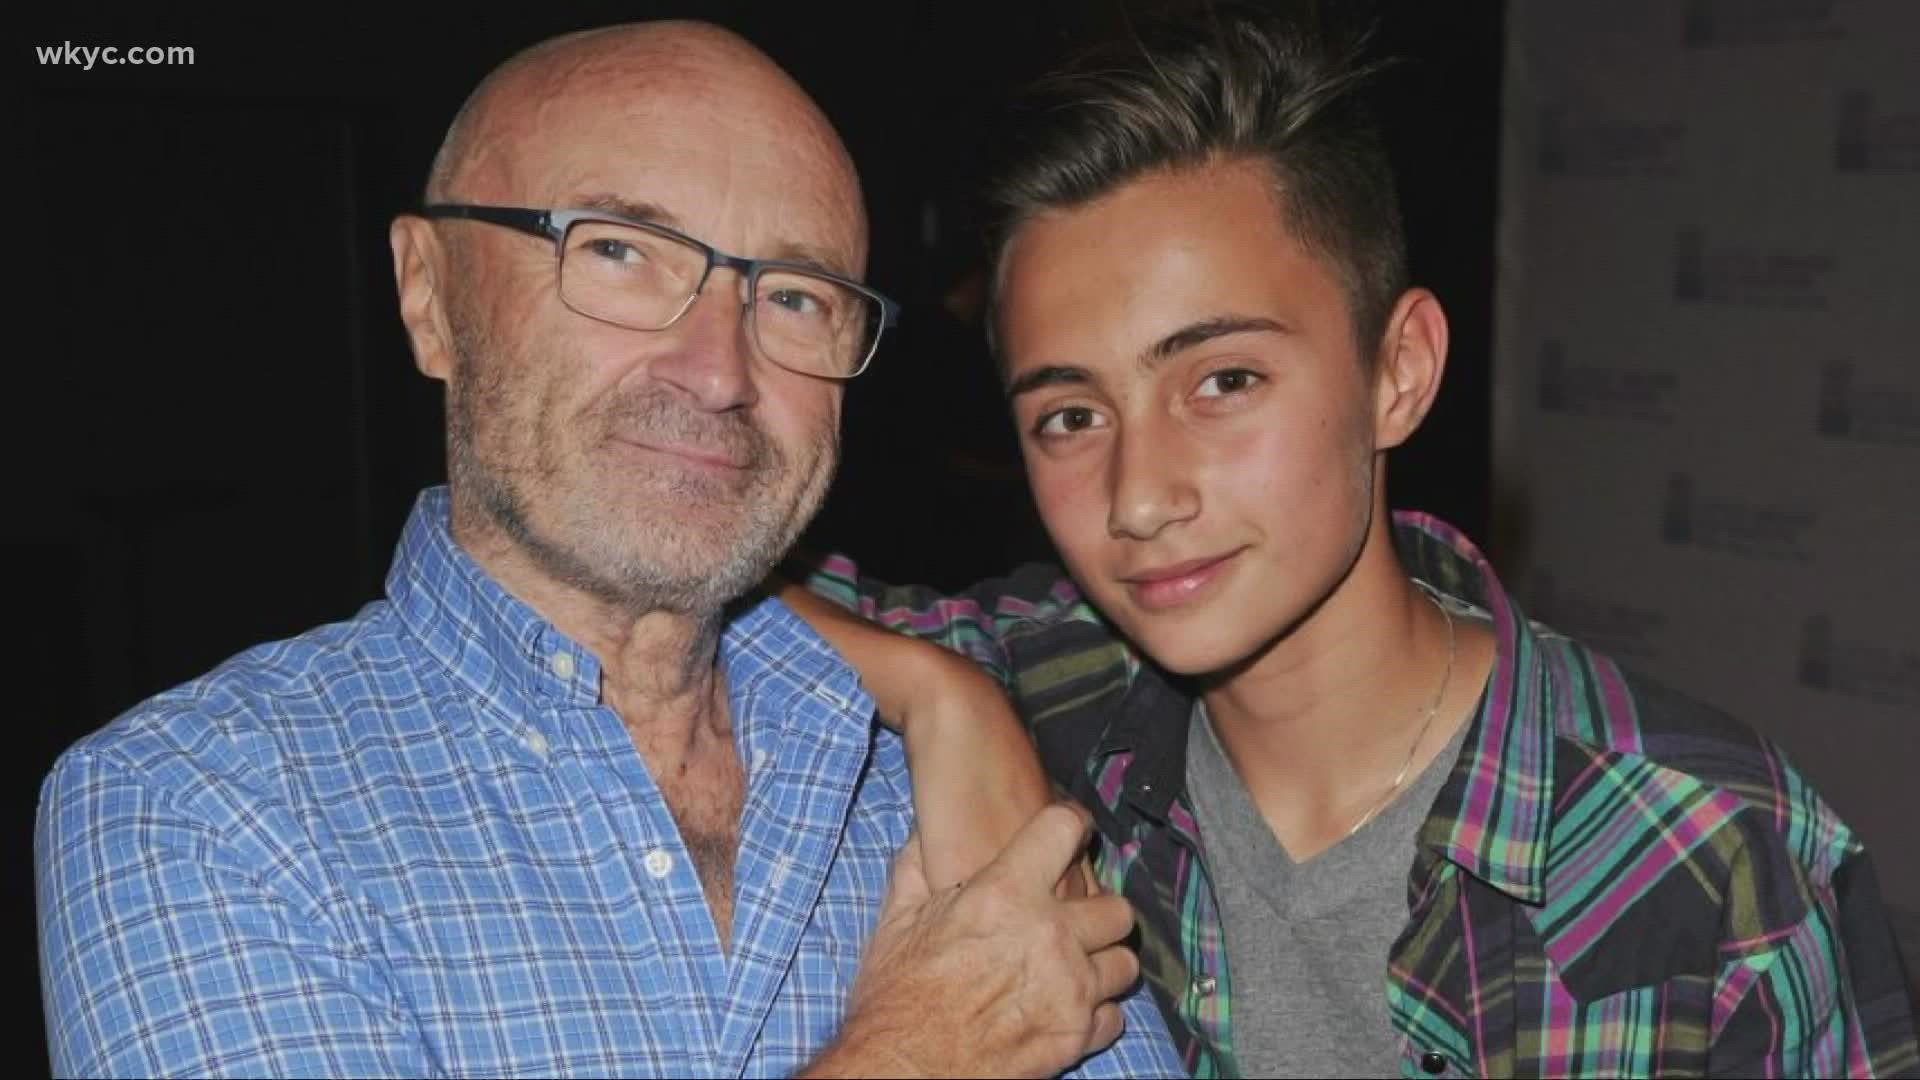 The legendary Phil Collins is passing the torch.